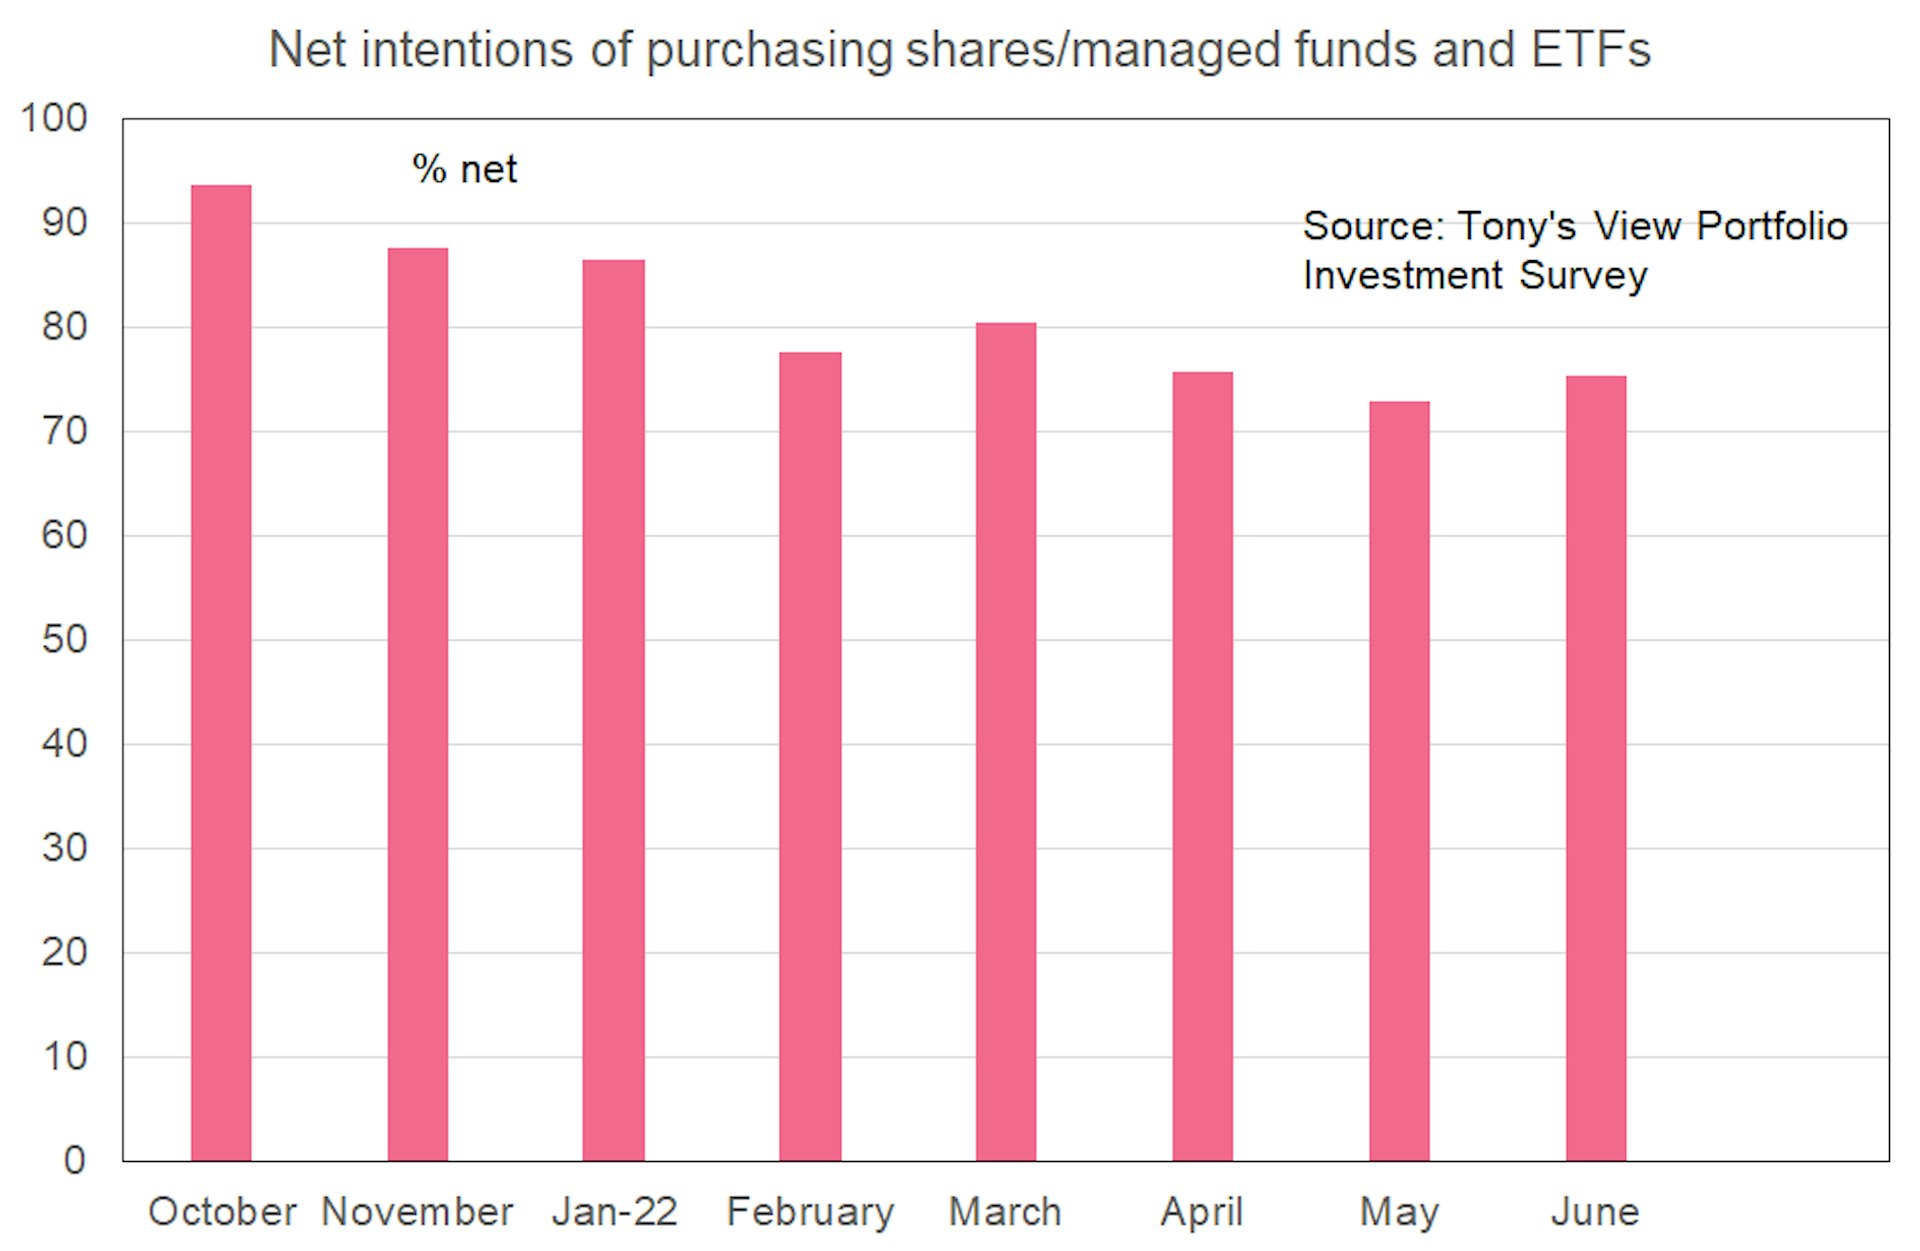 Graph showing net intentions of purchasing shares/managed funds and ETFs falling from over 90% in October 2021, to around 75% in June 2022. 